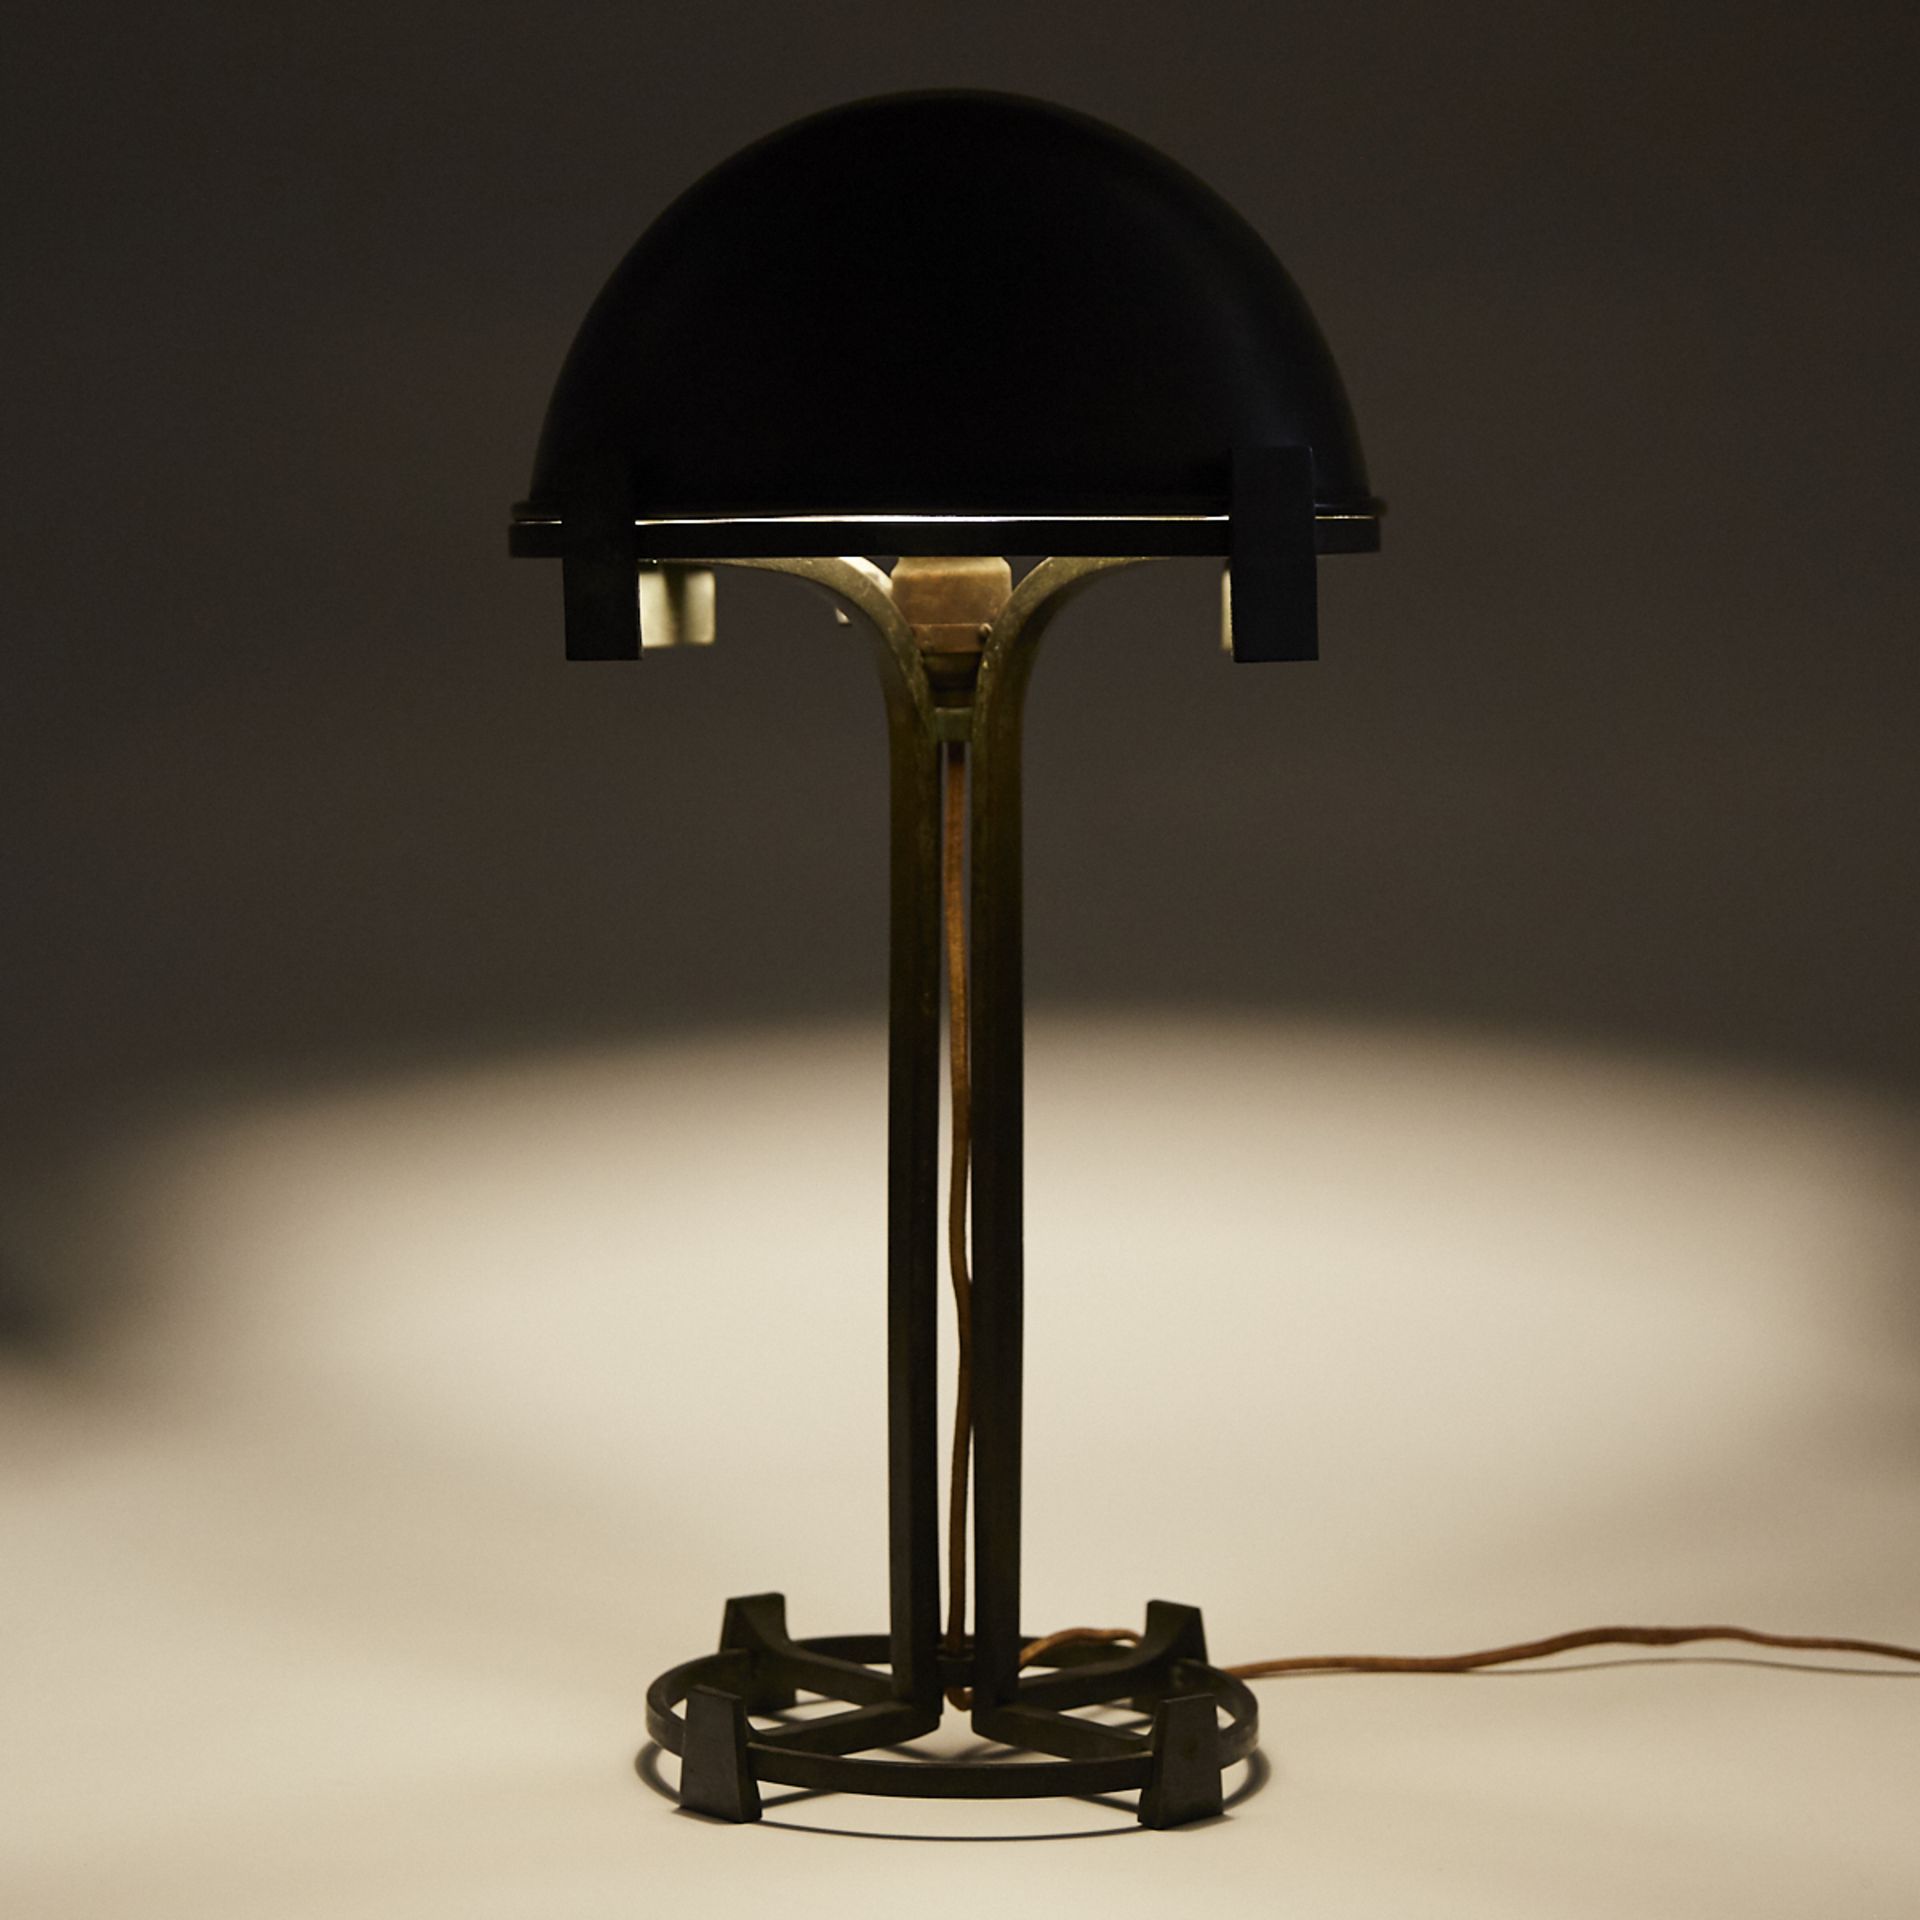 Early 20th c. Secessionist Dome Desk Lamp Mkd Germany - Image 2 of 7